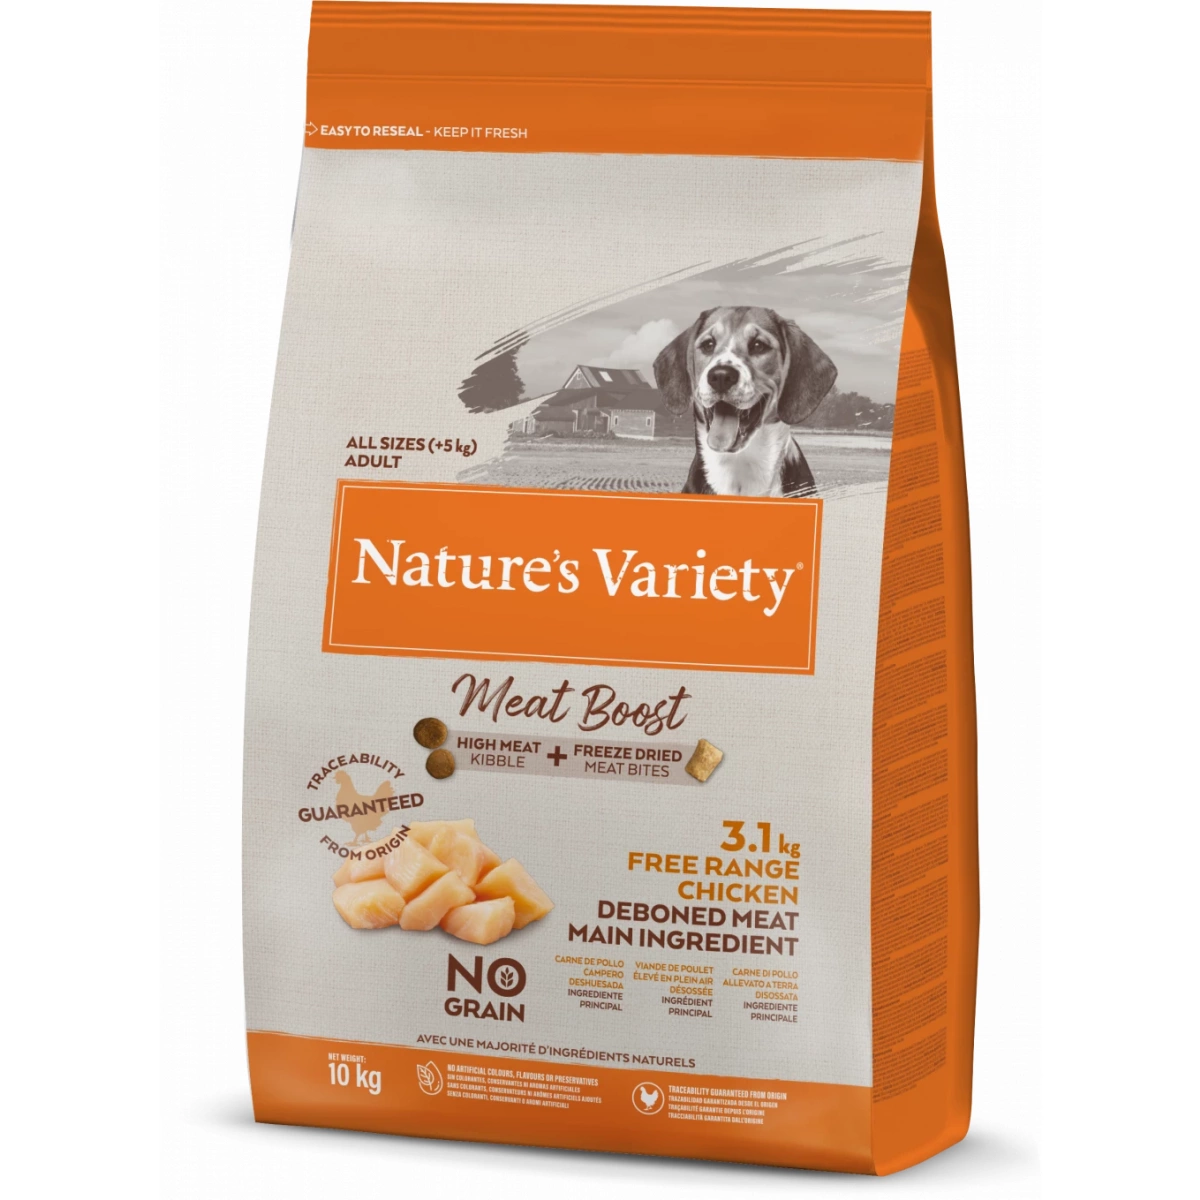 Nature’s Variety Meat Boost – Chicken 1.5kg – Pawfect Supplies Ltd Product Image